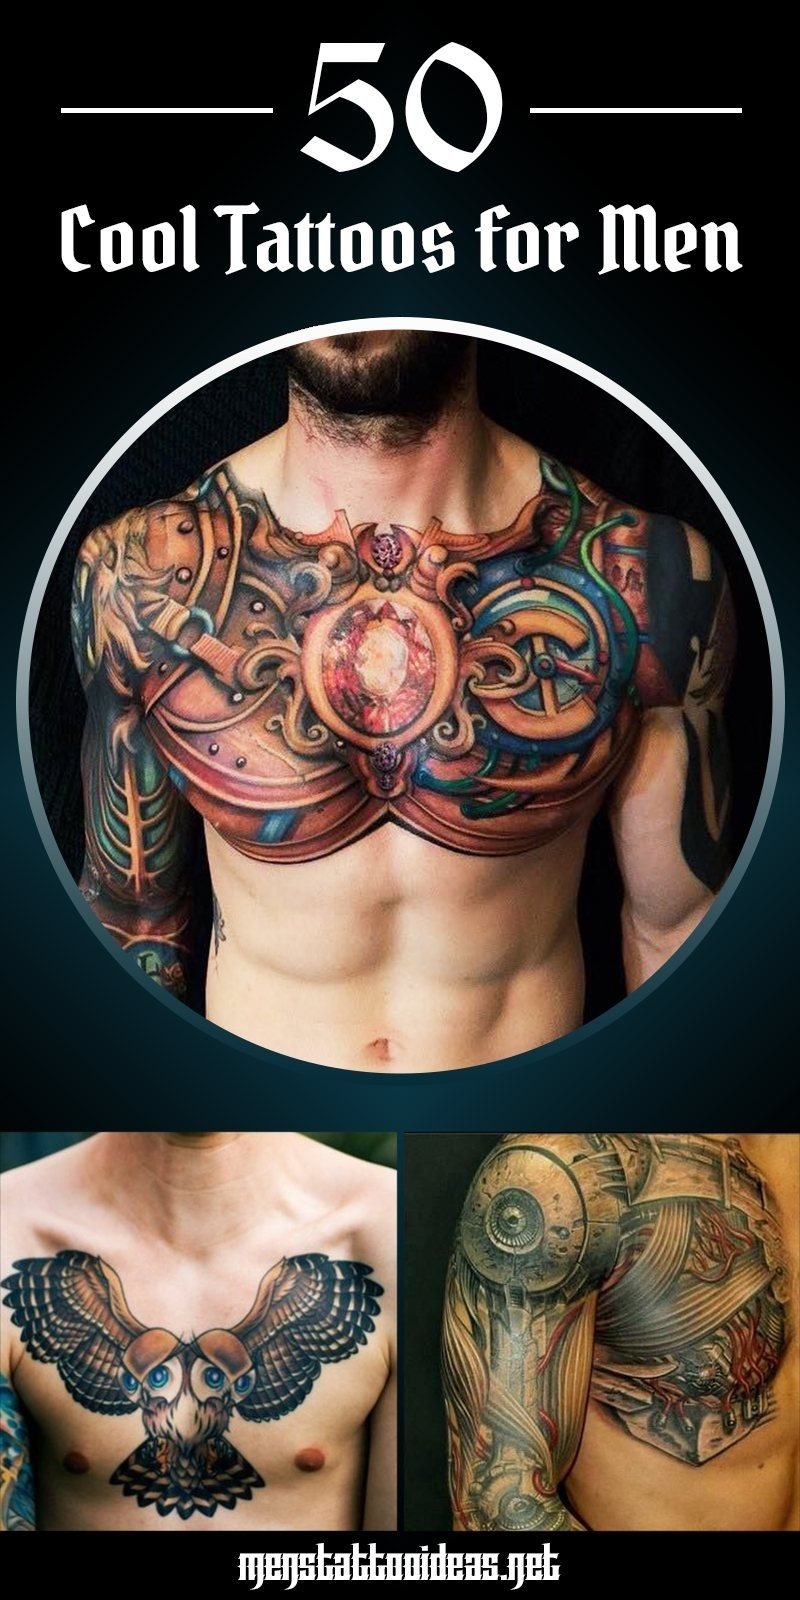 10 Wonderful Awesome Tattoos Ideas For Guys cool tattoos for men best tattoo ideas and designs for guys 2 2022